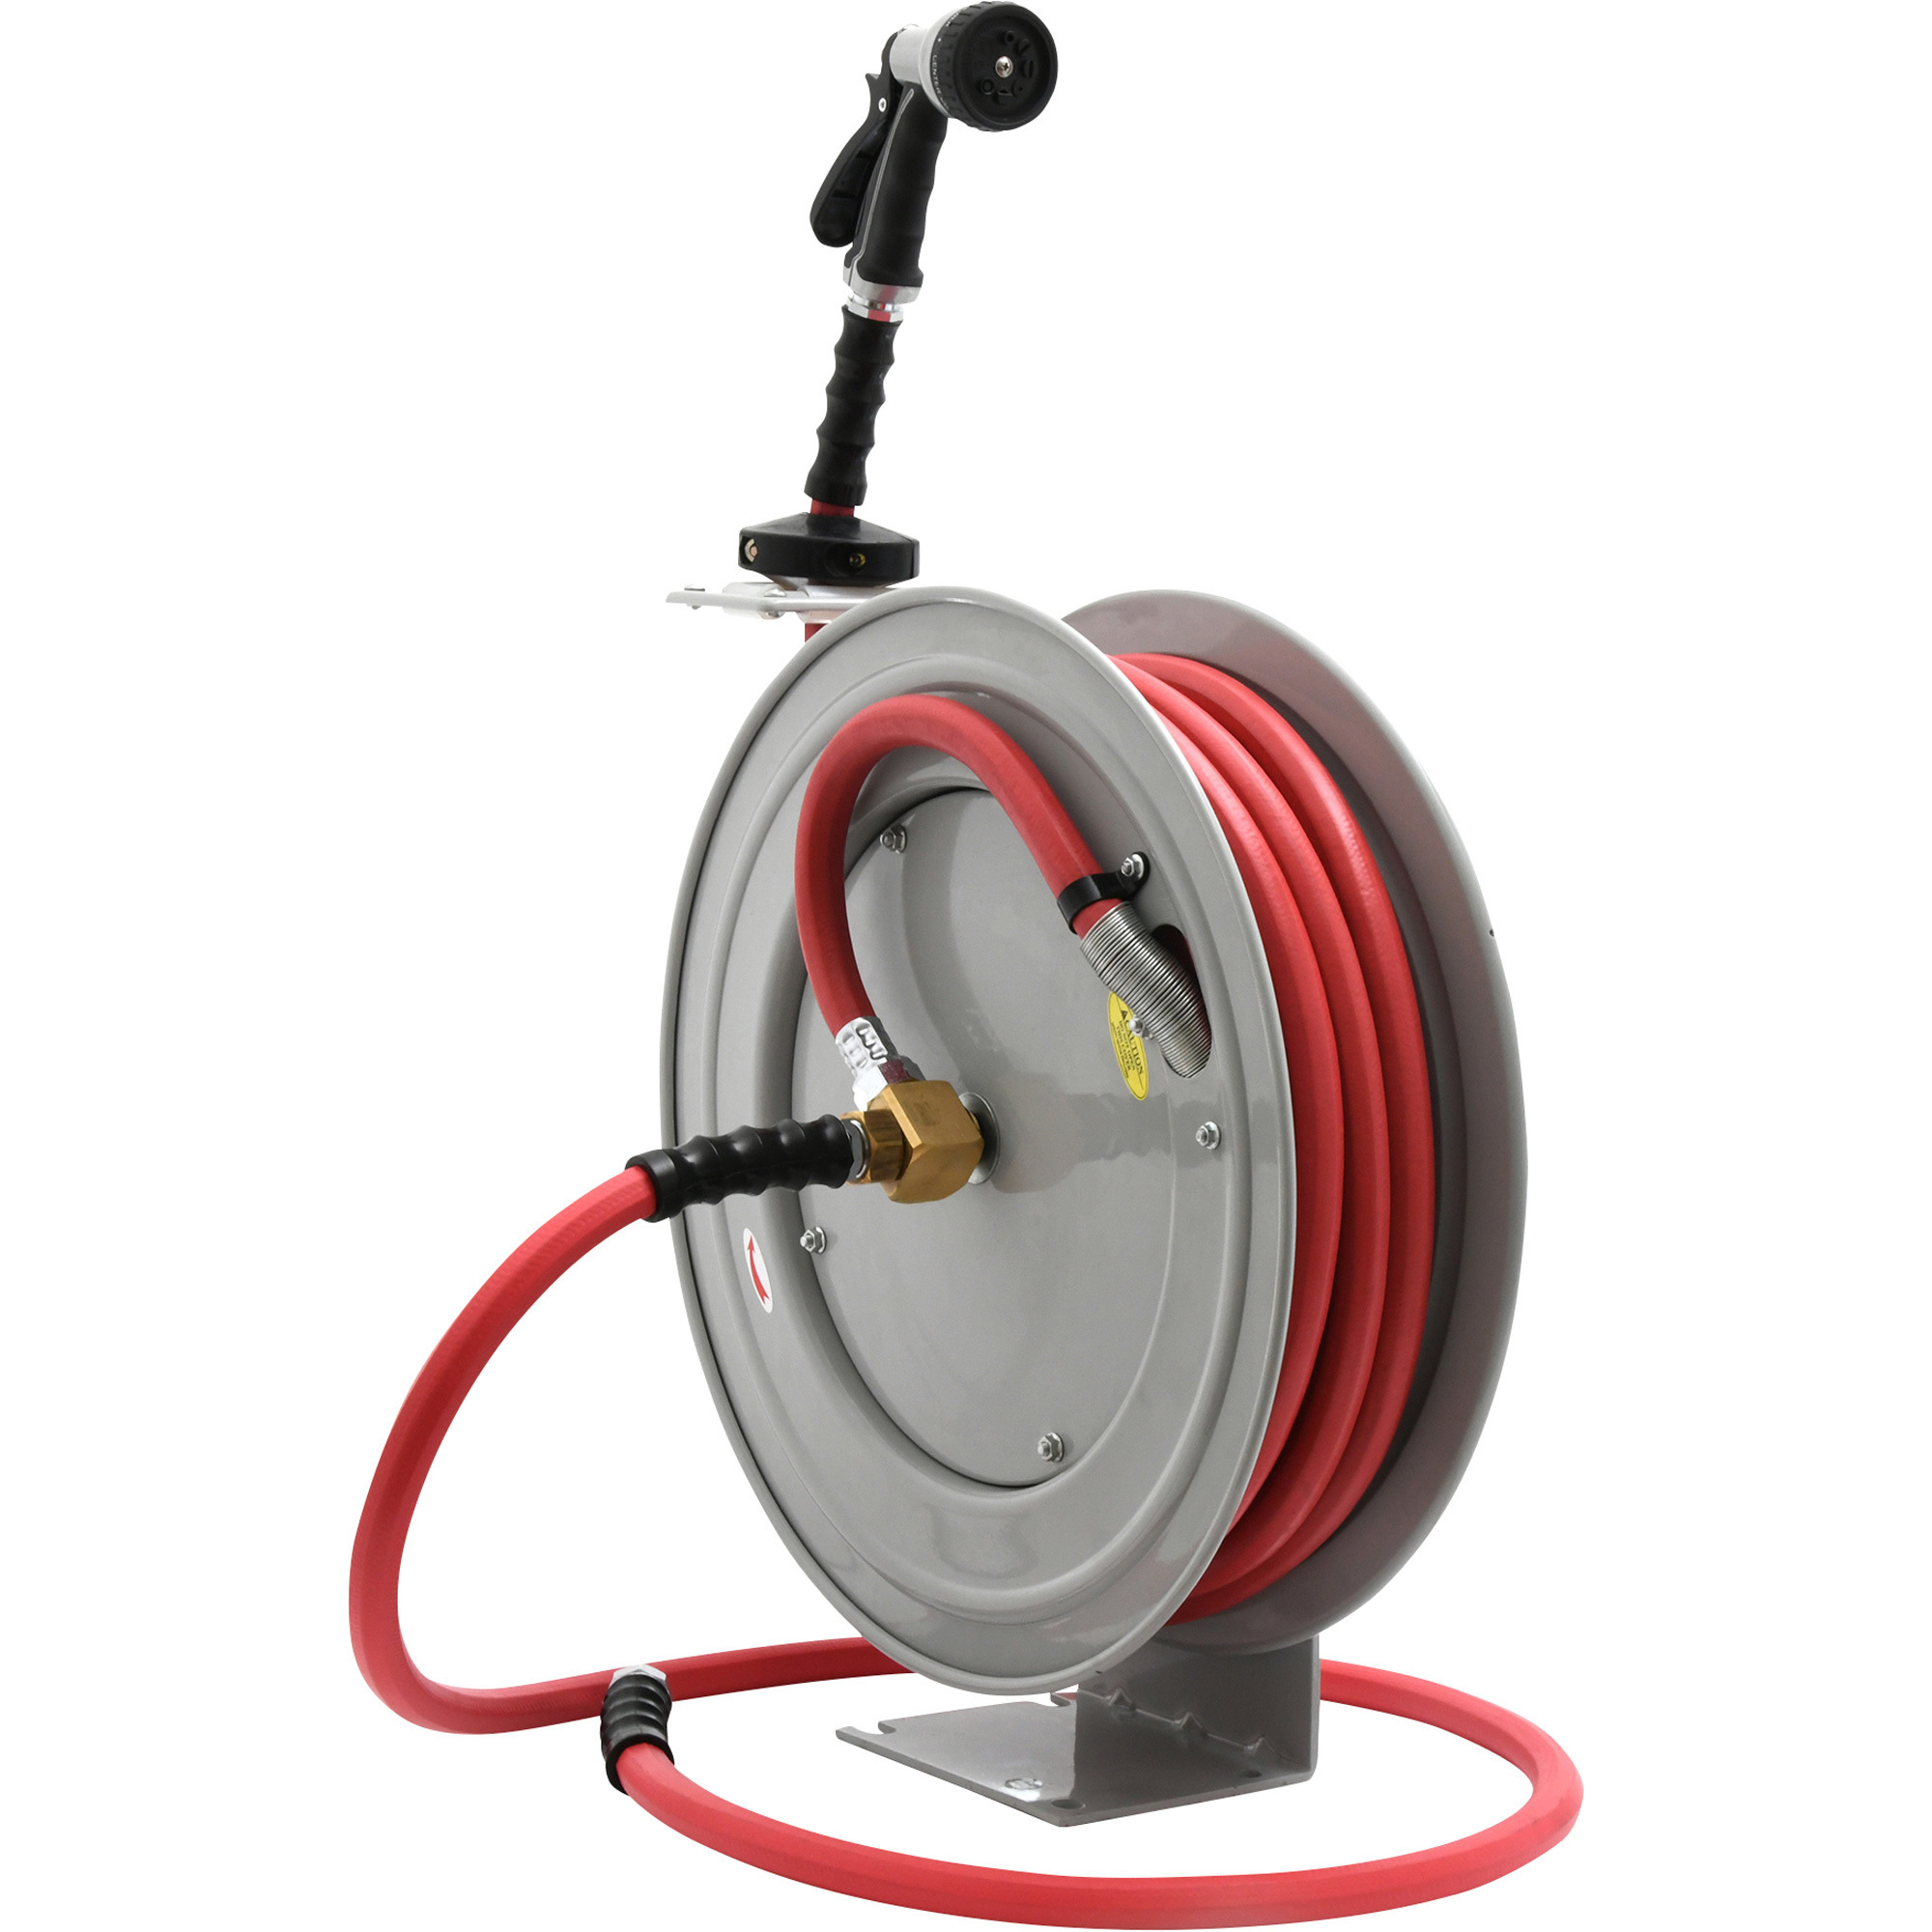 Avagard Retractable Hose Reel, Includes 5/8in. x 50ft. Hot/Cold